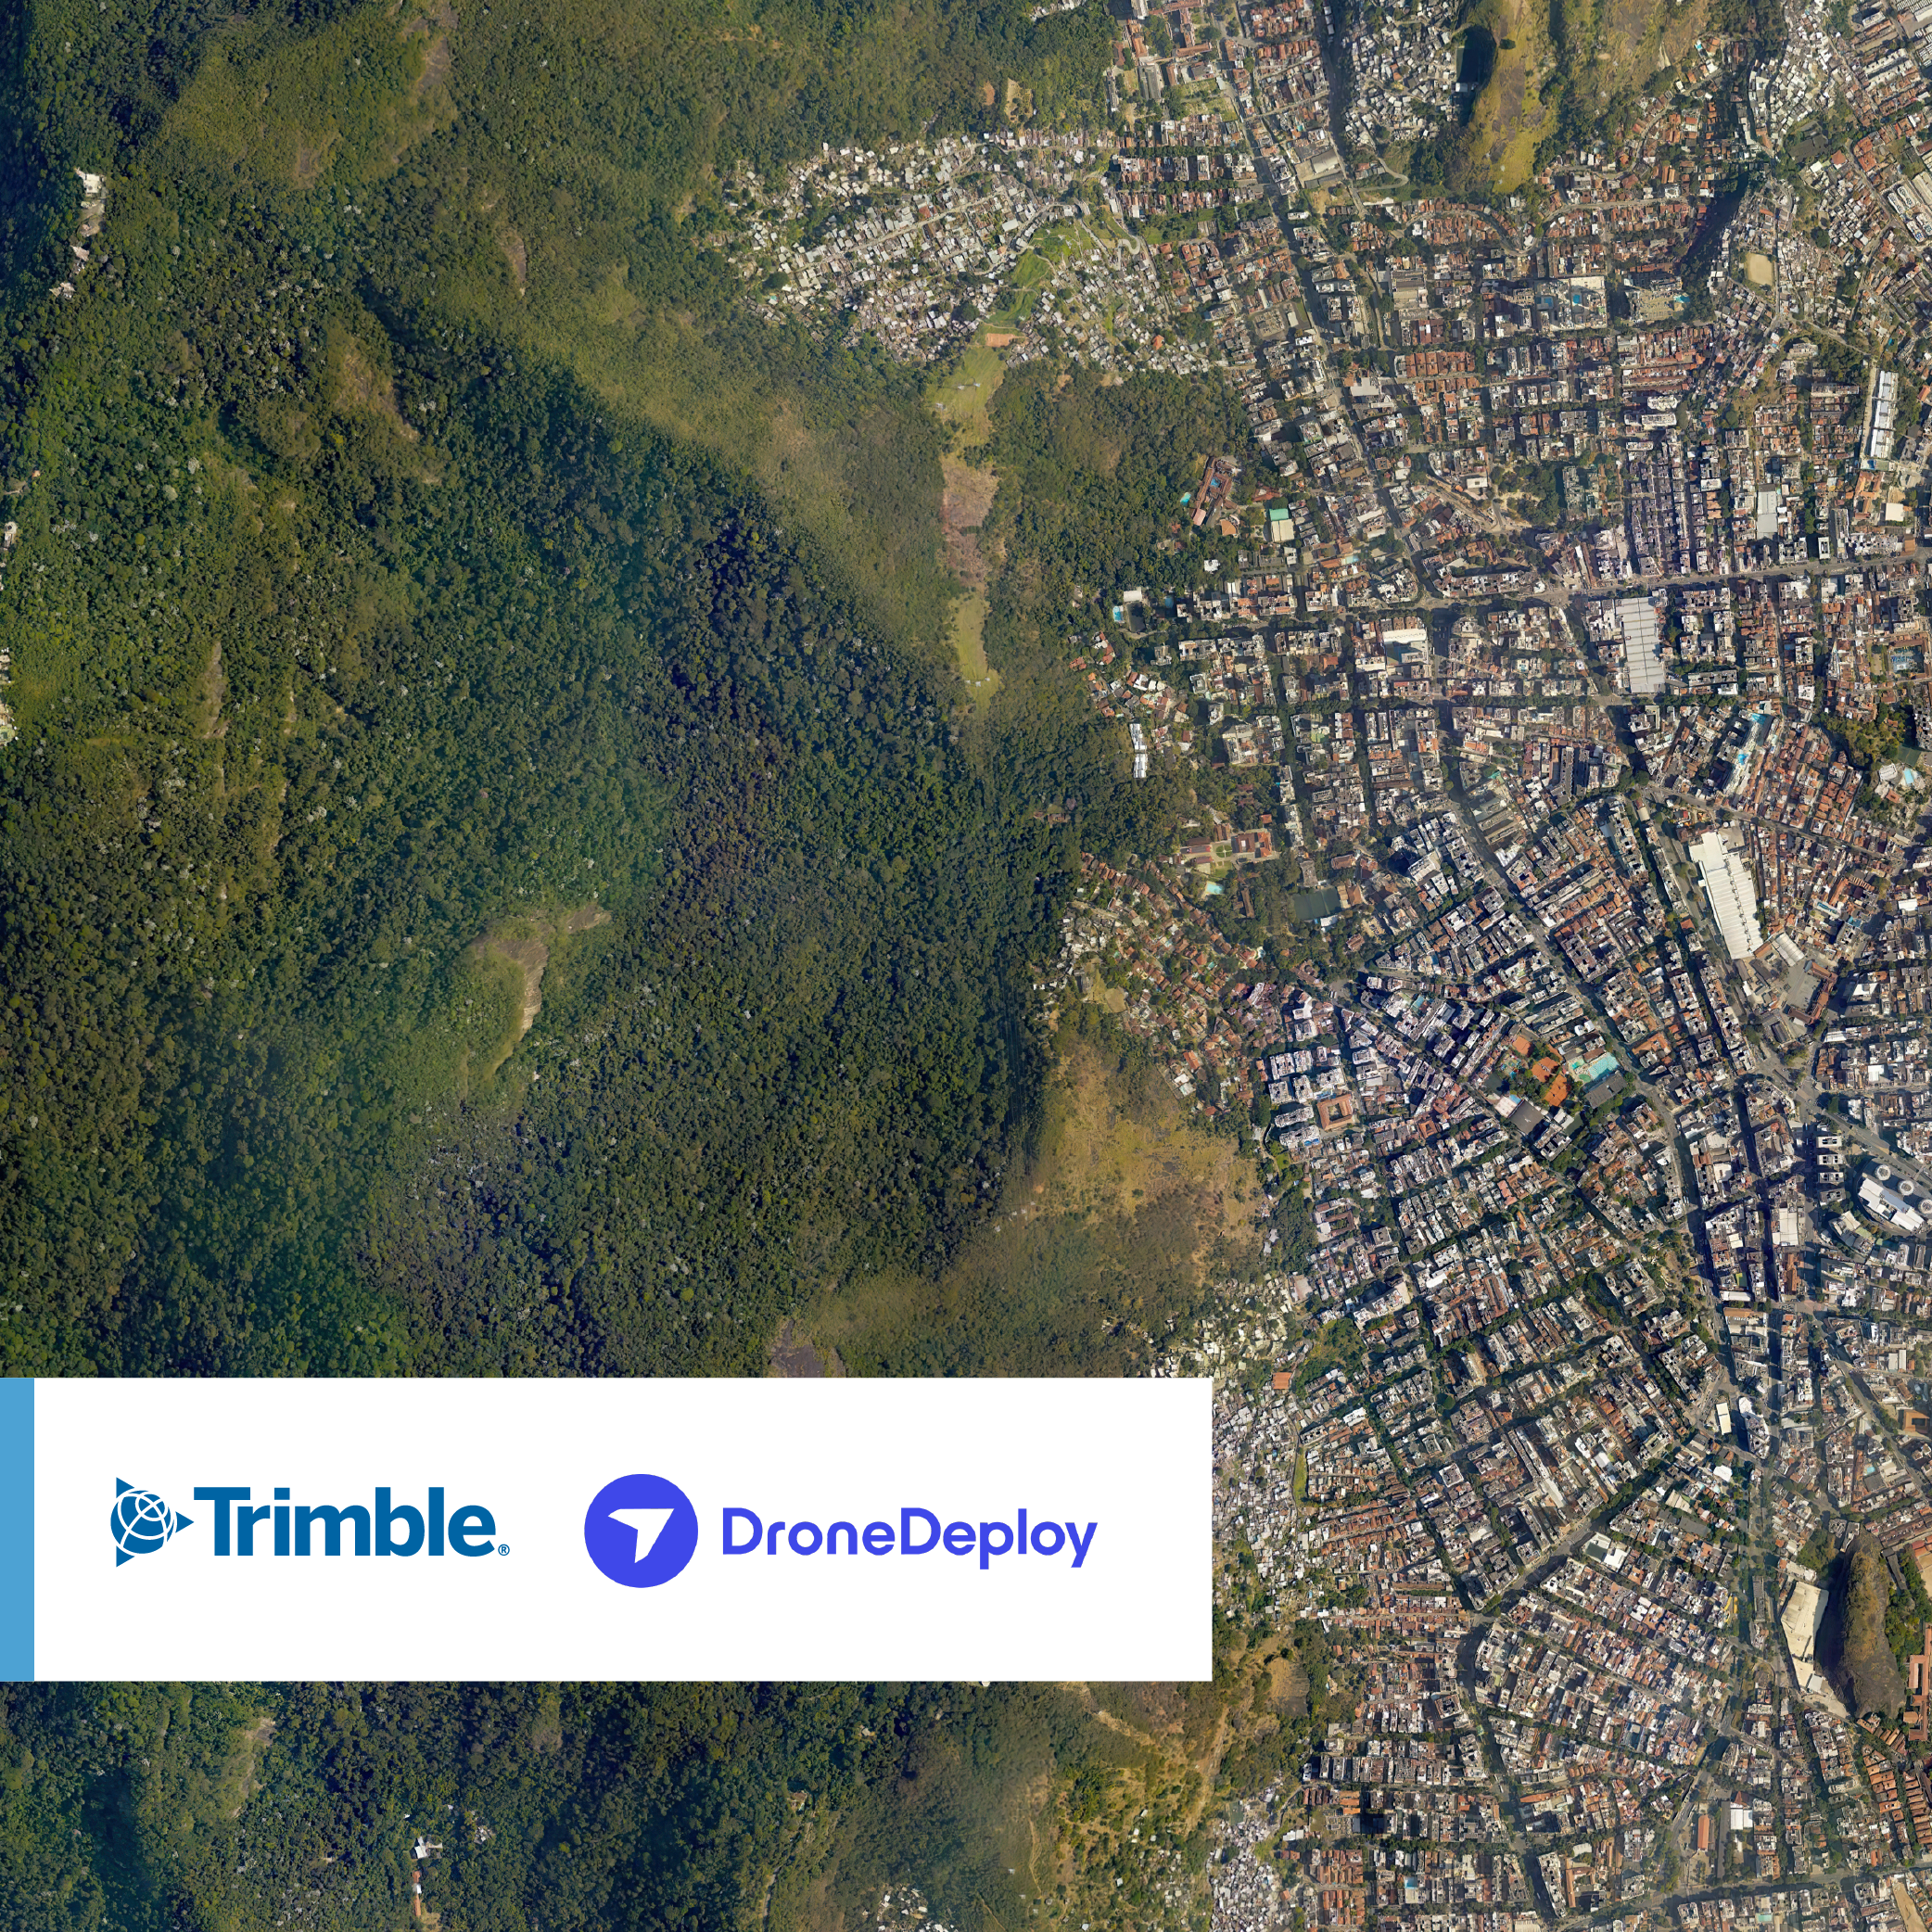 Trimble and DroneDeploy Introduce Premier Positioning Accuracy and Streamlined Workflow for Reality Capture from Drones